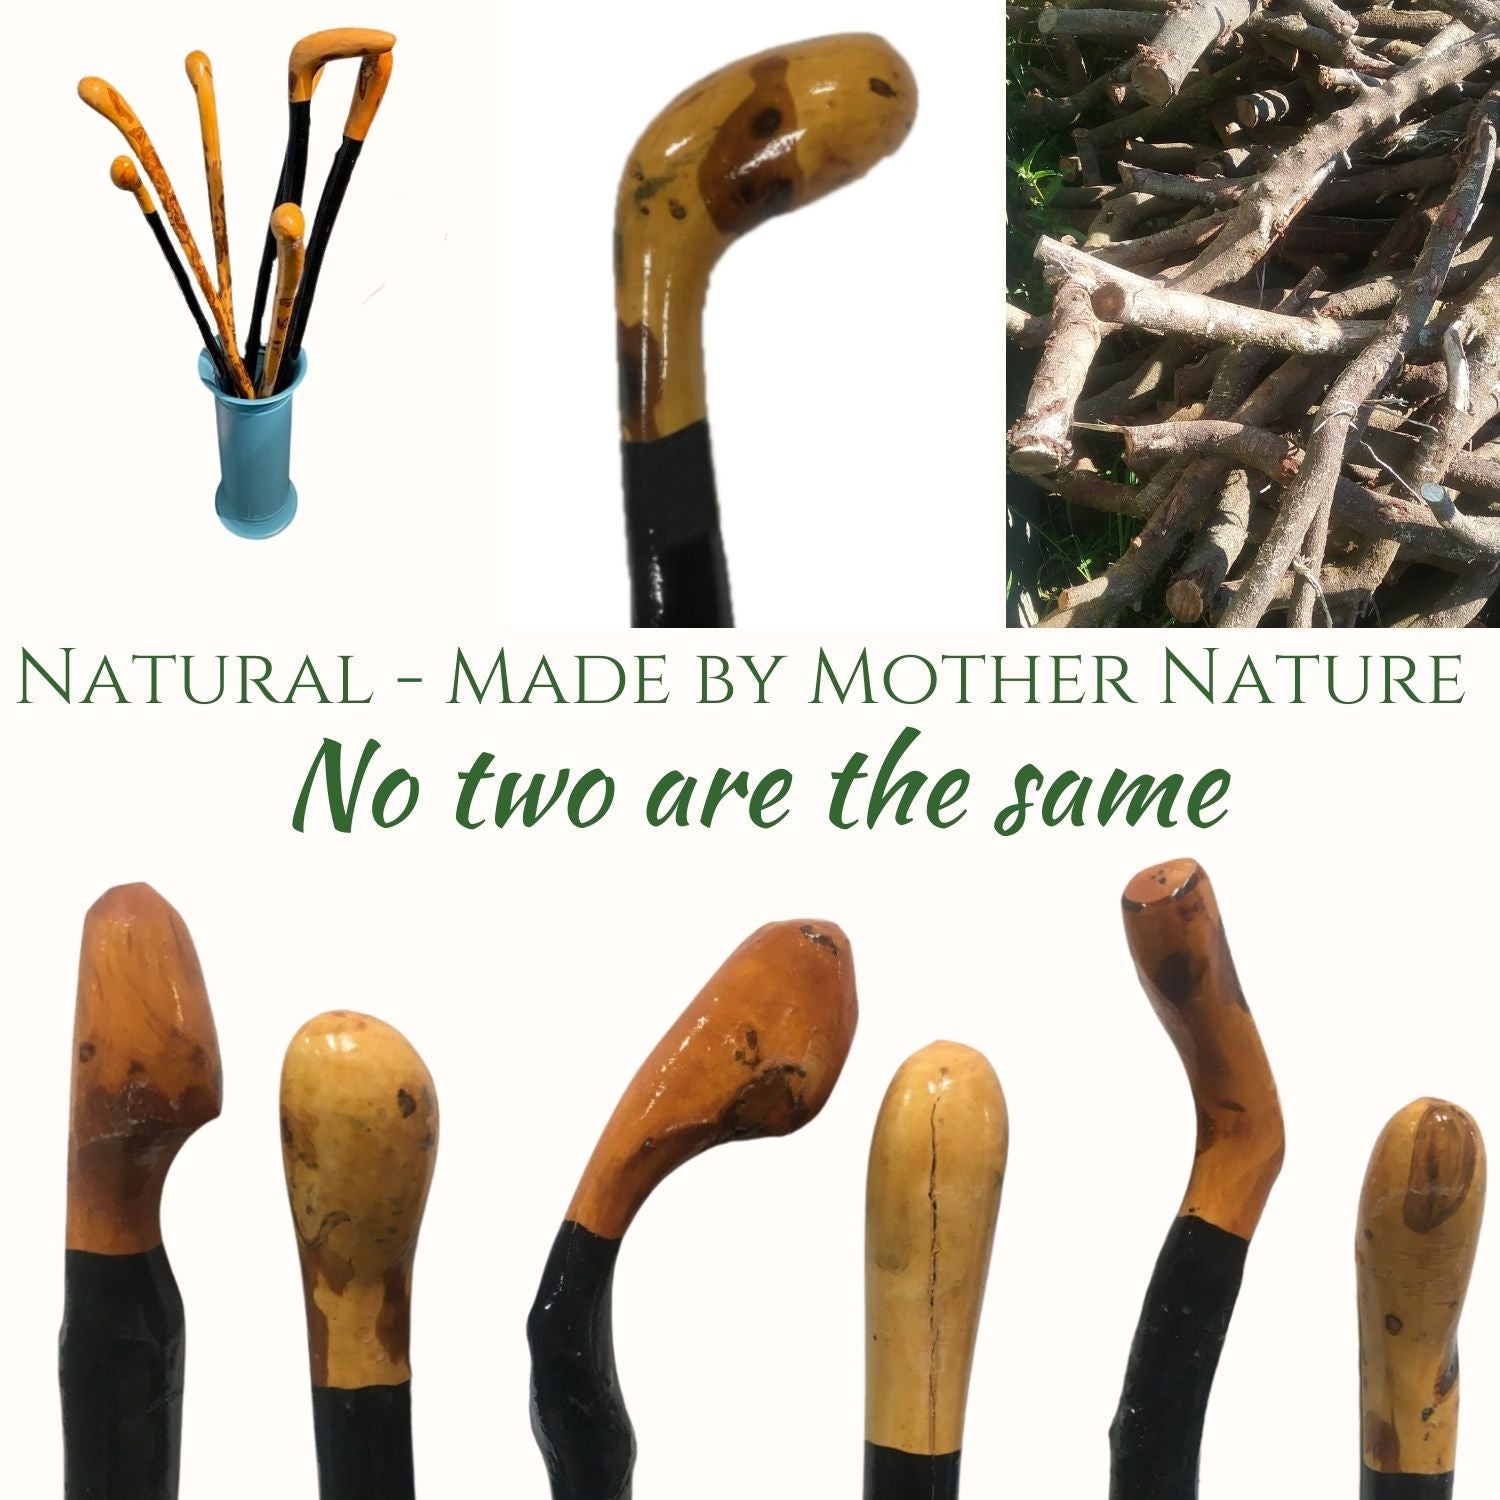 Blackthorn Walking Stick Limited Supply Natural Product Made in